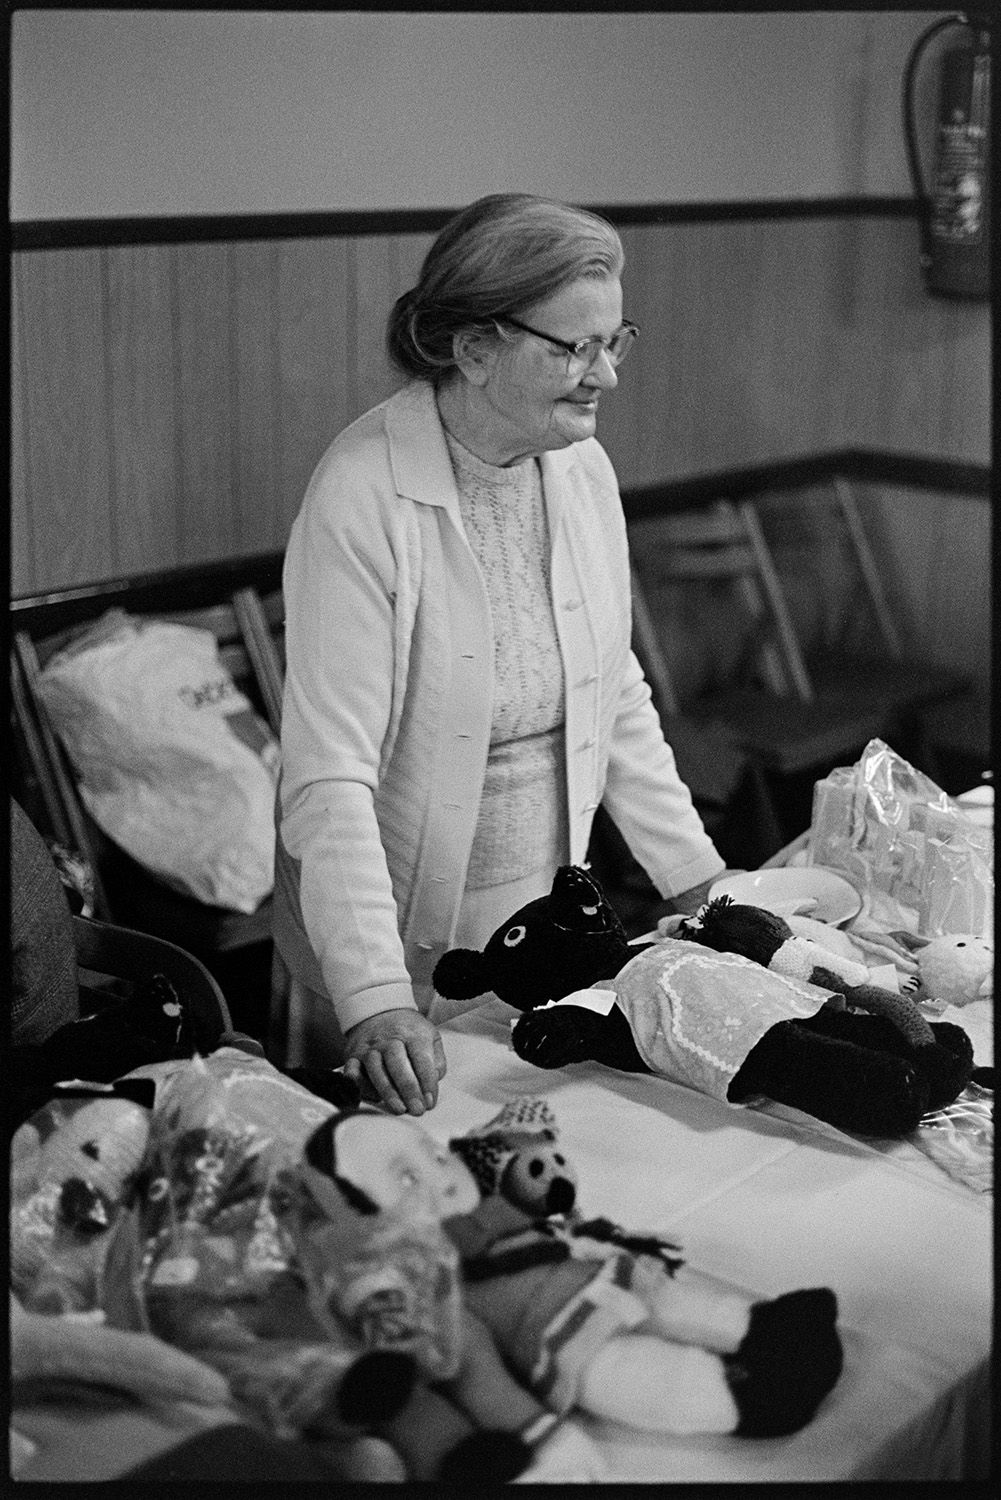 Jumble sale in village hall. Women looking through second hand clothes. 
[A woman running a stall with knitted toys and dolls at a jumble sale in Dolton Village Hall.]